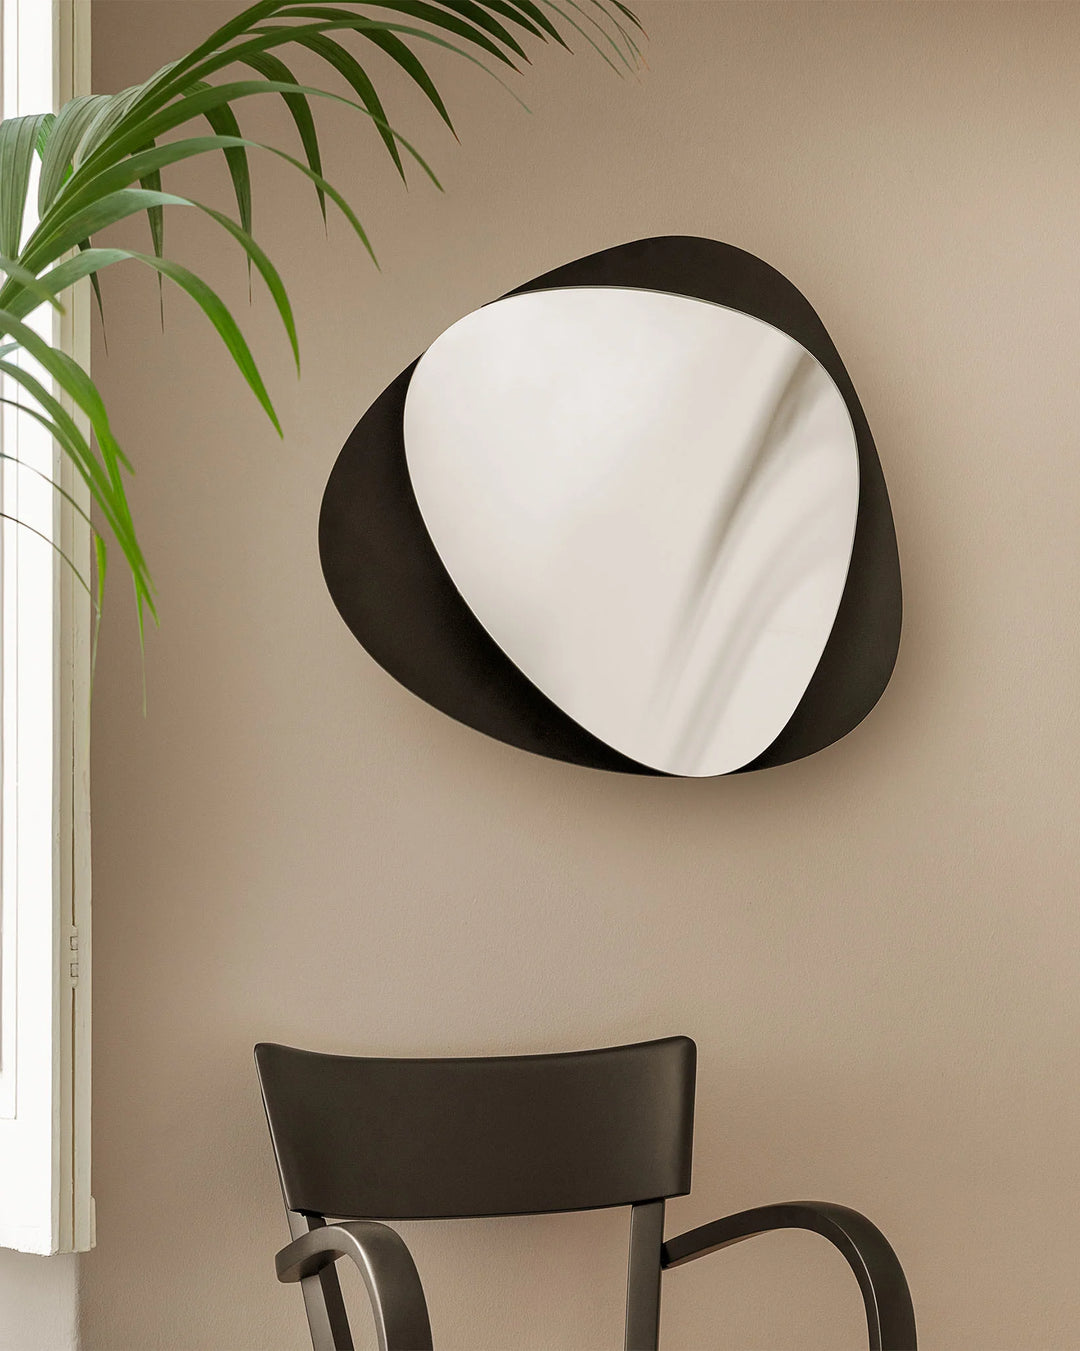 Colombina collection Wall mirror